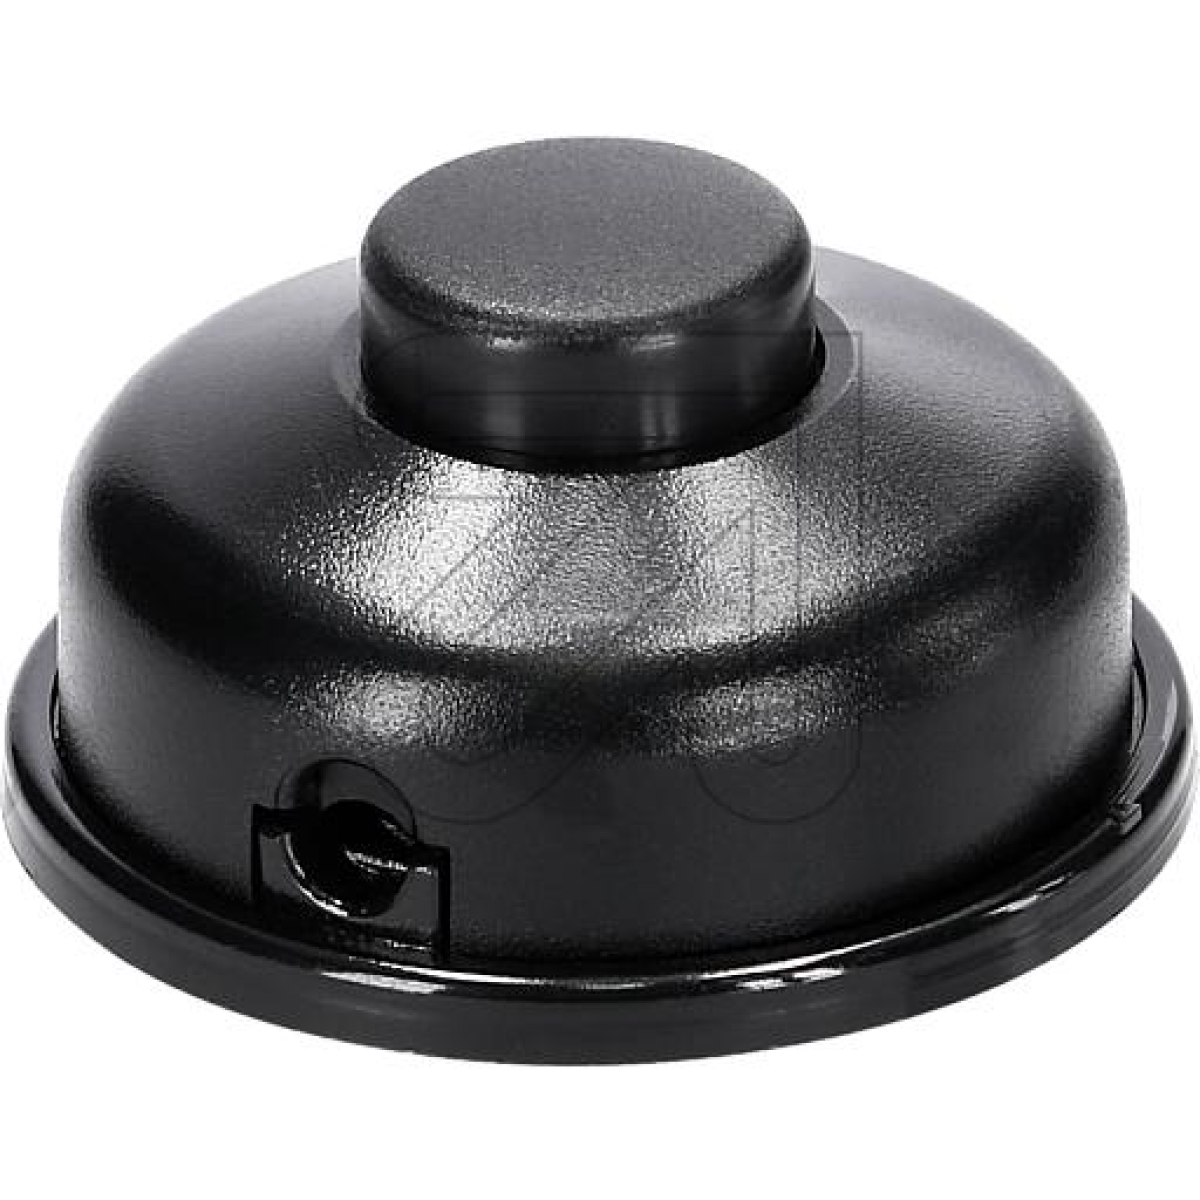 inter BärFoot pedal switch series black 2AArticle-No: 054105